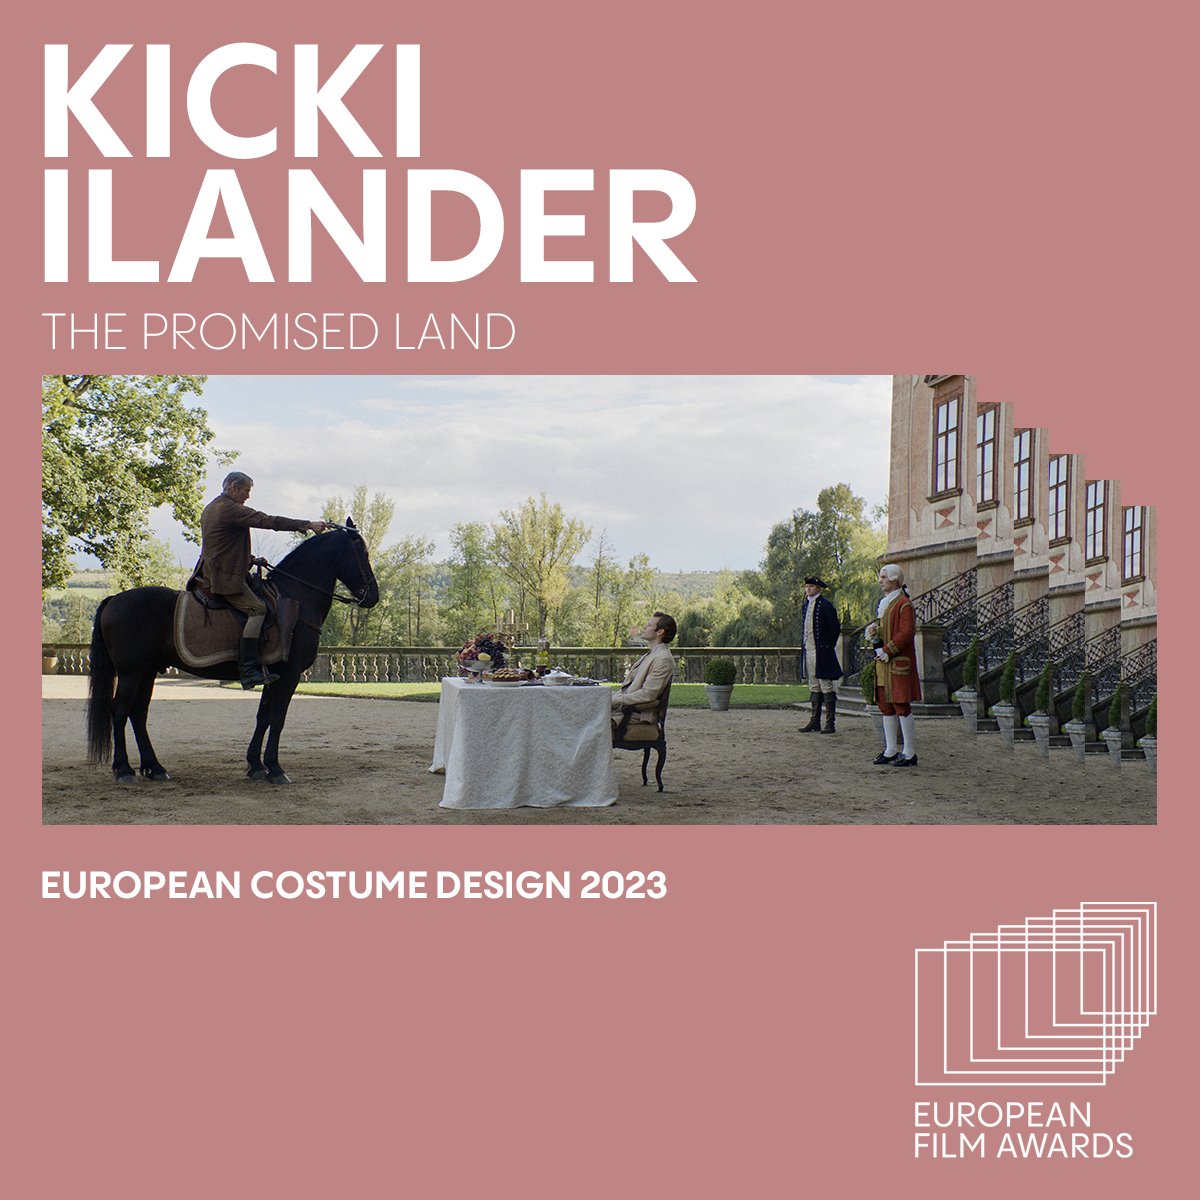 Kicki Ilander has received the award for European Costume Design 2023 for her work for THE PROMISED LAND. Congratulations! 👏🏼 #europeanfilmawards #monthofeuropeanfilm